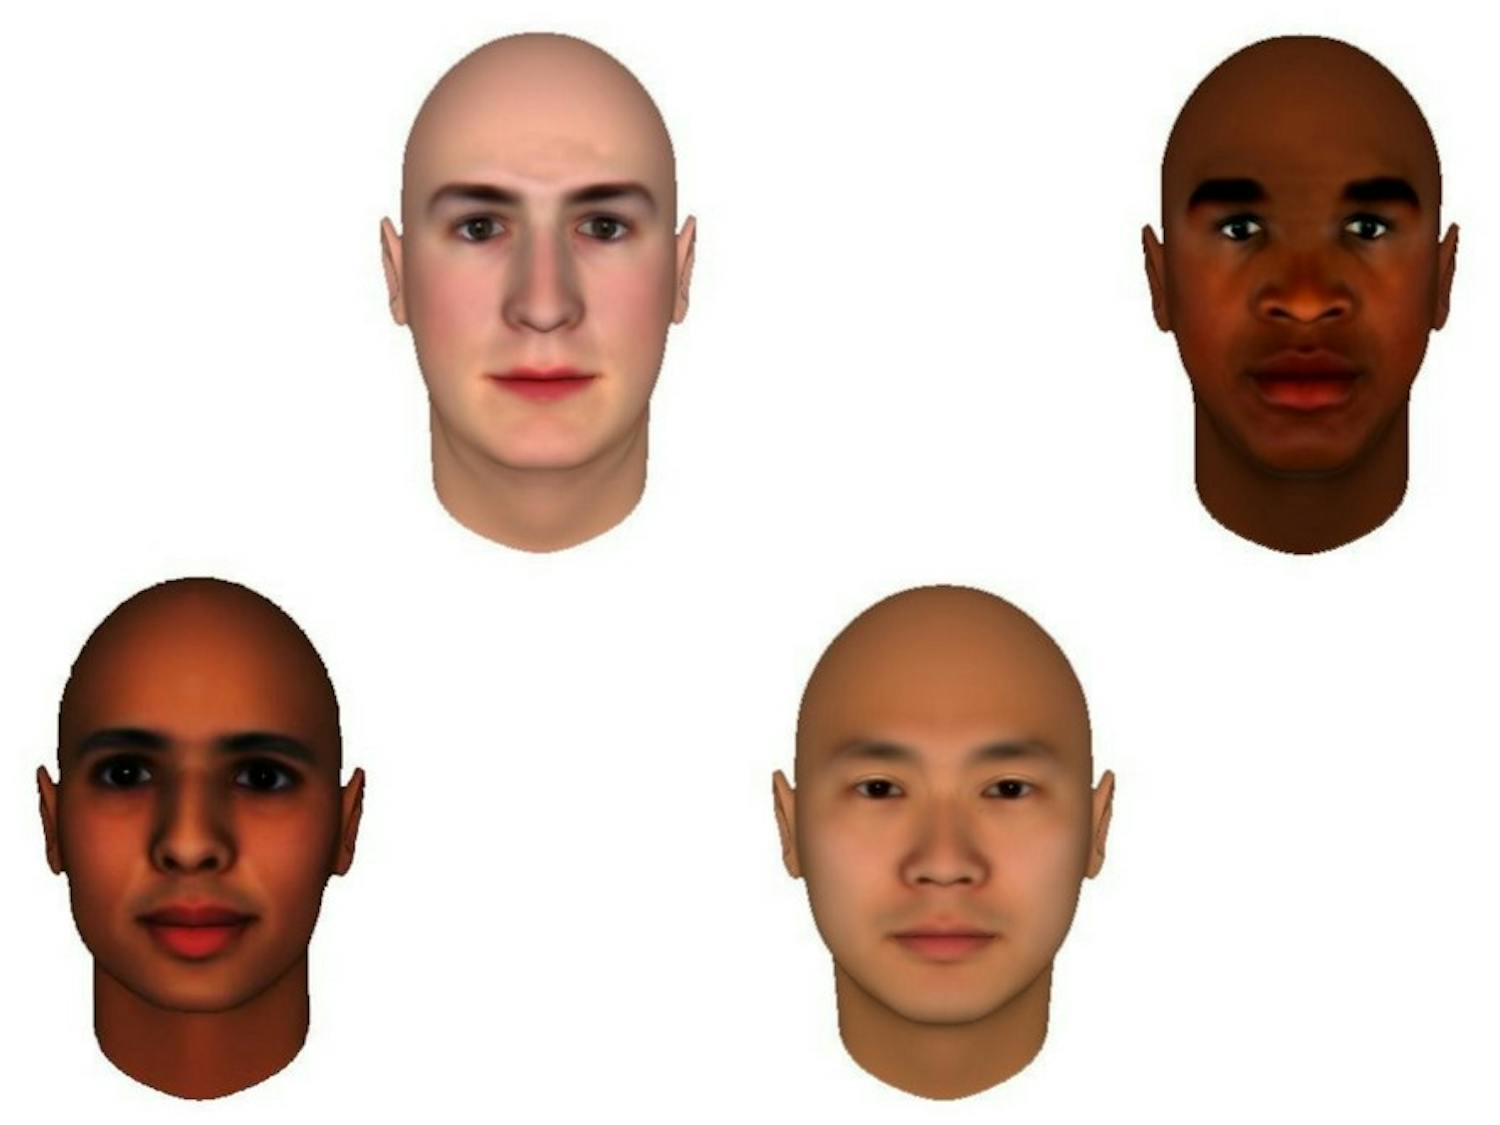 In the online version, the participants saw avatars representing other members of the group instead of seeing them face-to-face.